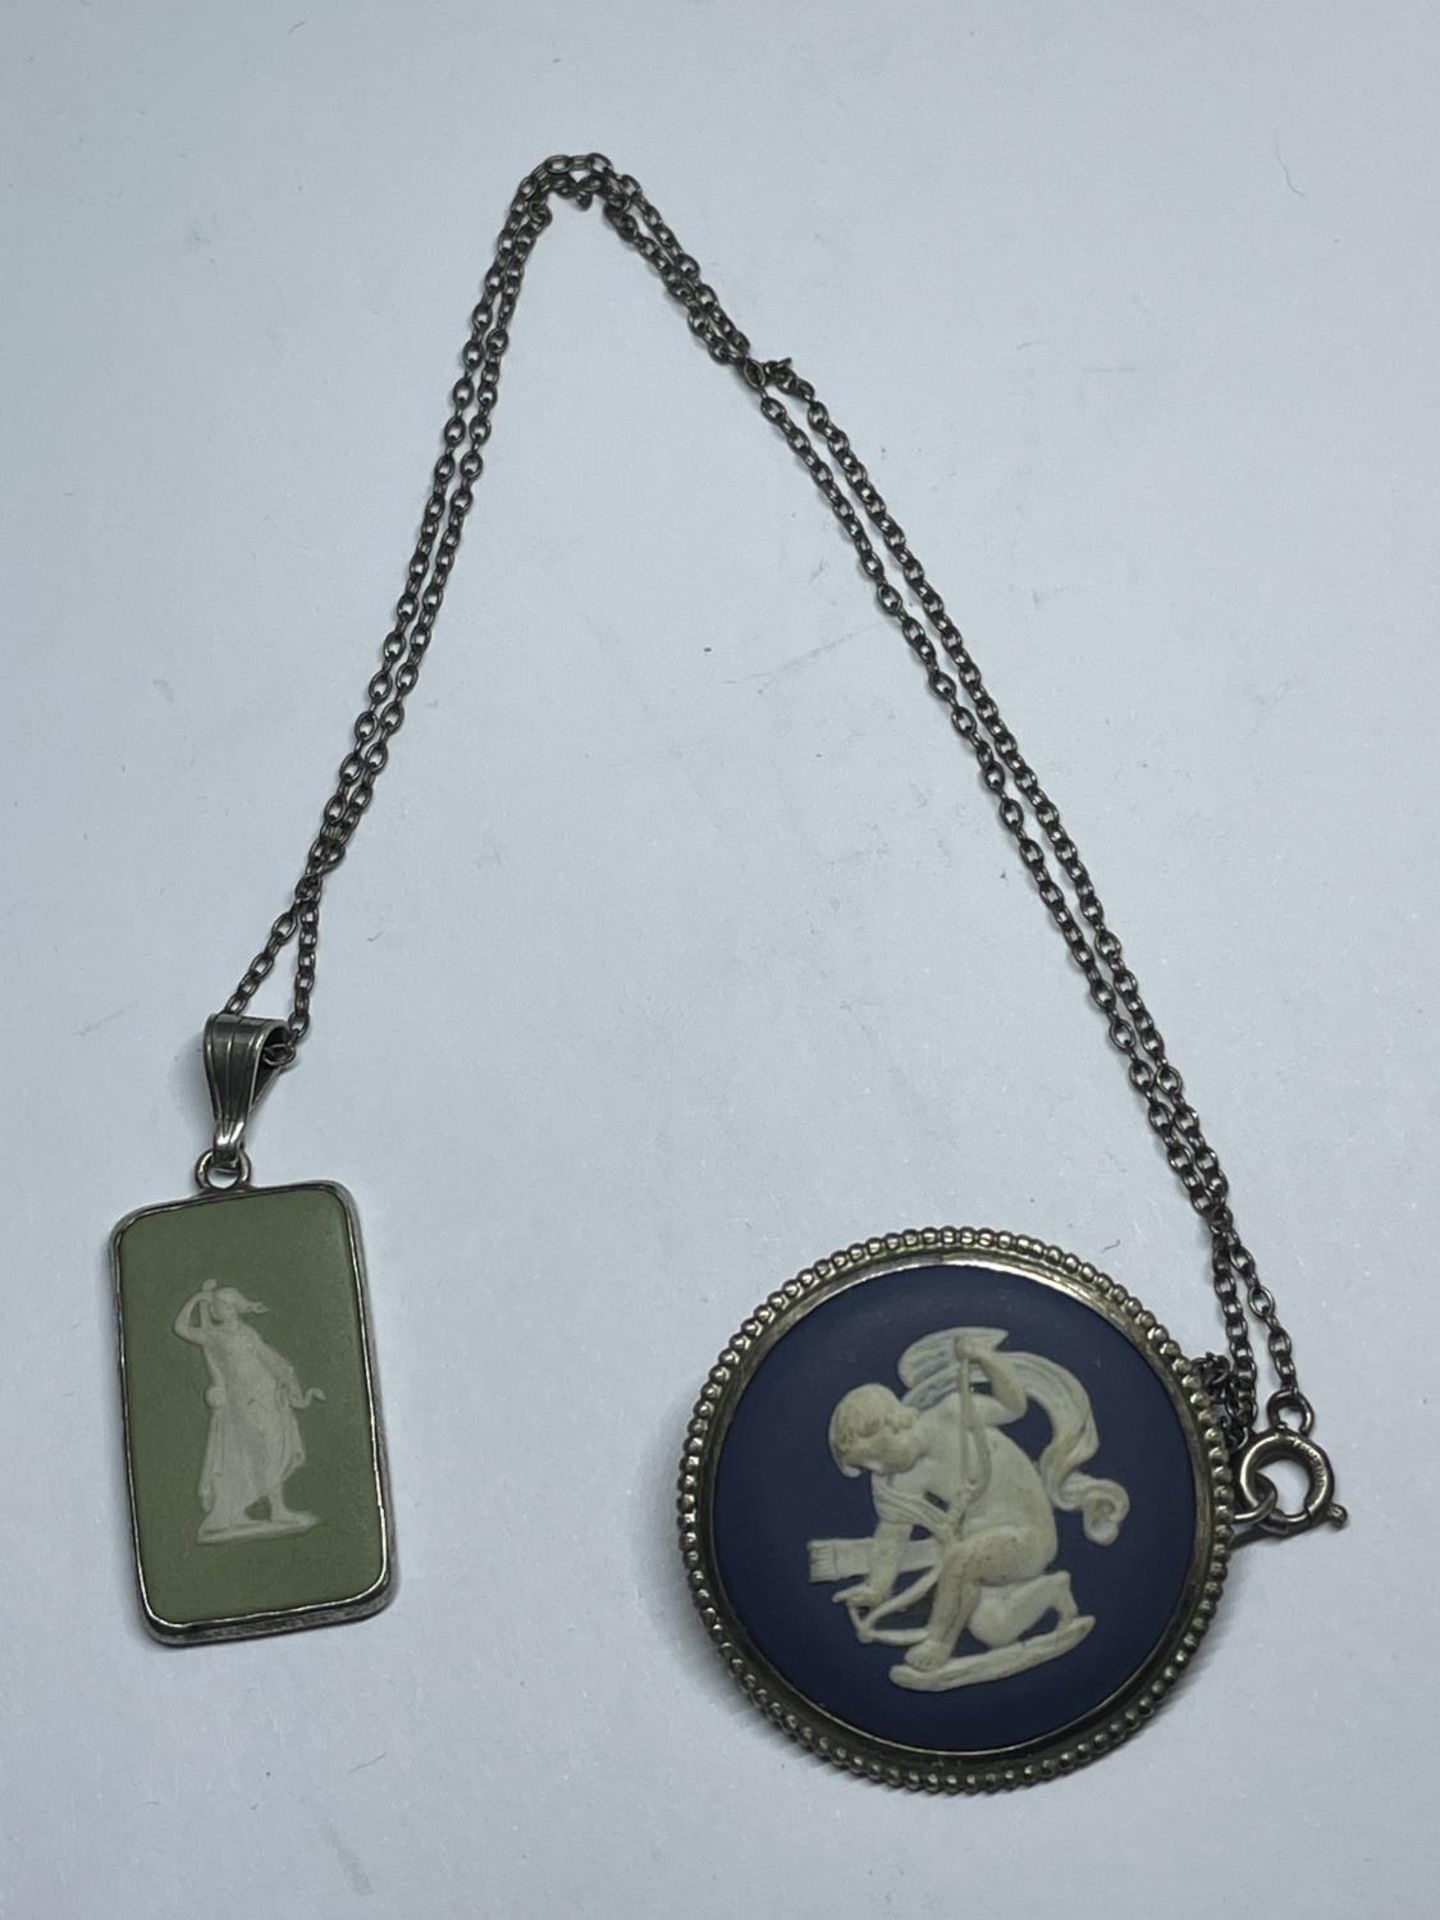 TWO WEDGWOOD JASPERWARE ITEMS TO INCLUDE A BLUE BROOCH AND A NECKLACE WITH GREEN PENDANT